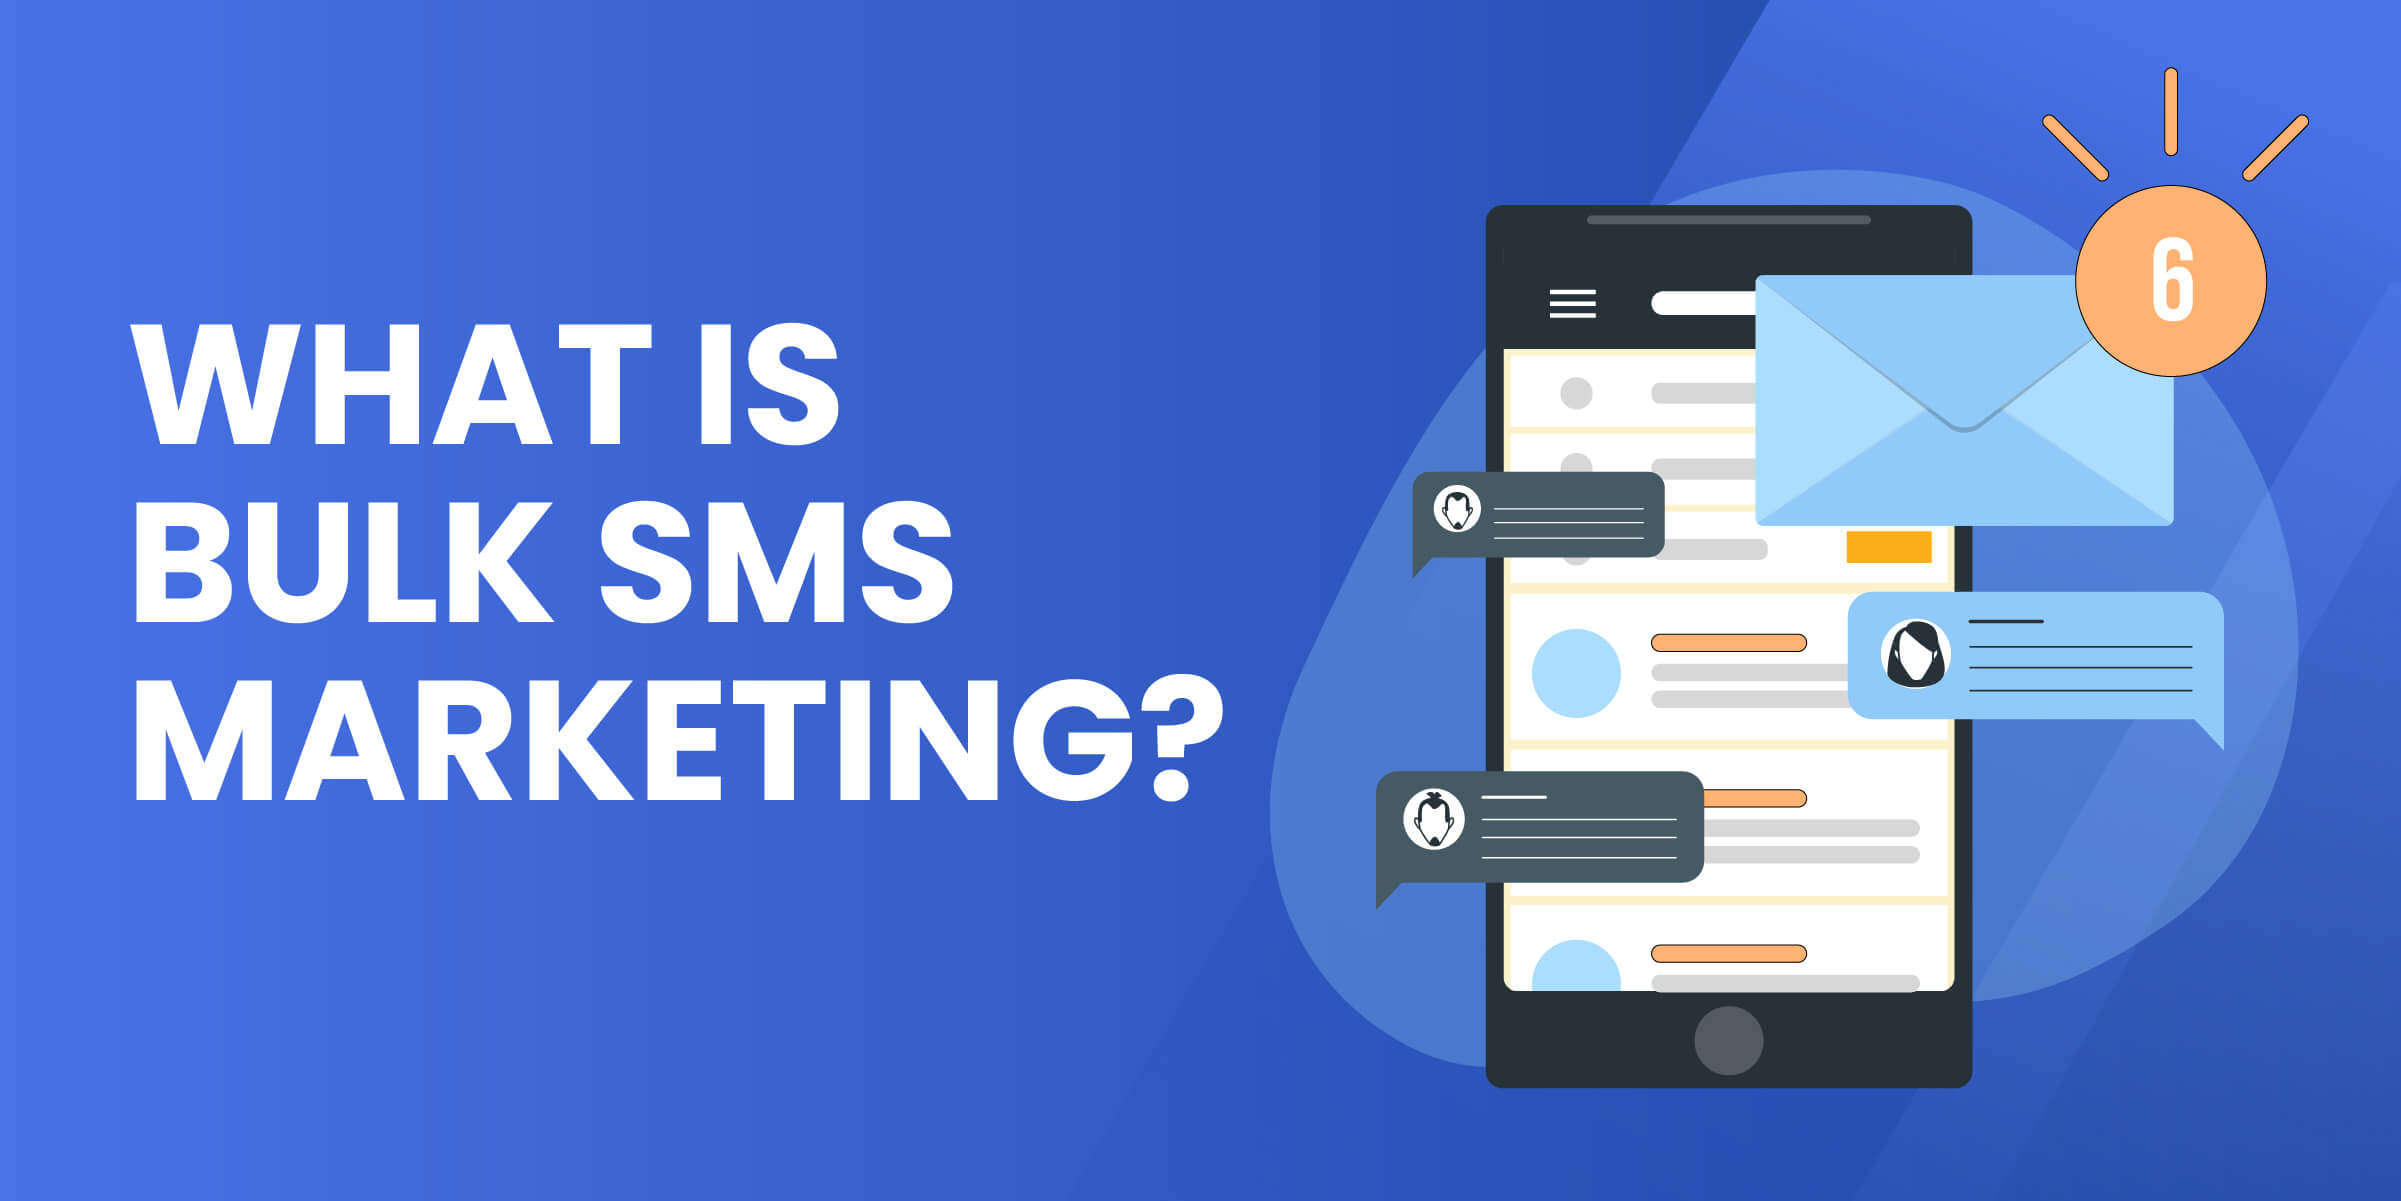 What is Bulk SMS Marketing